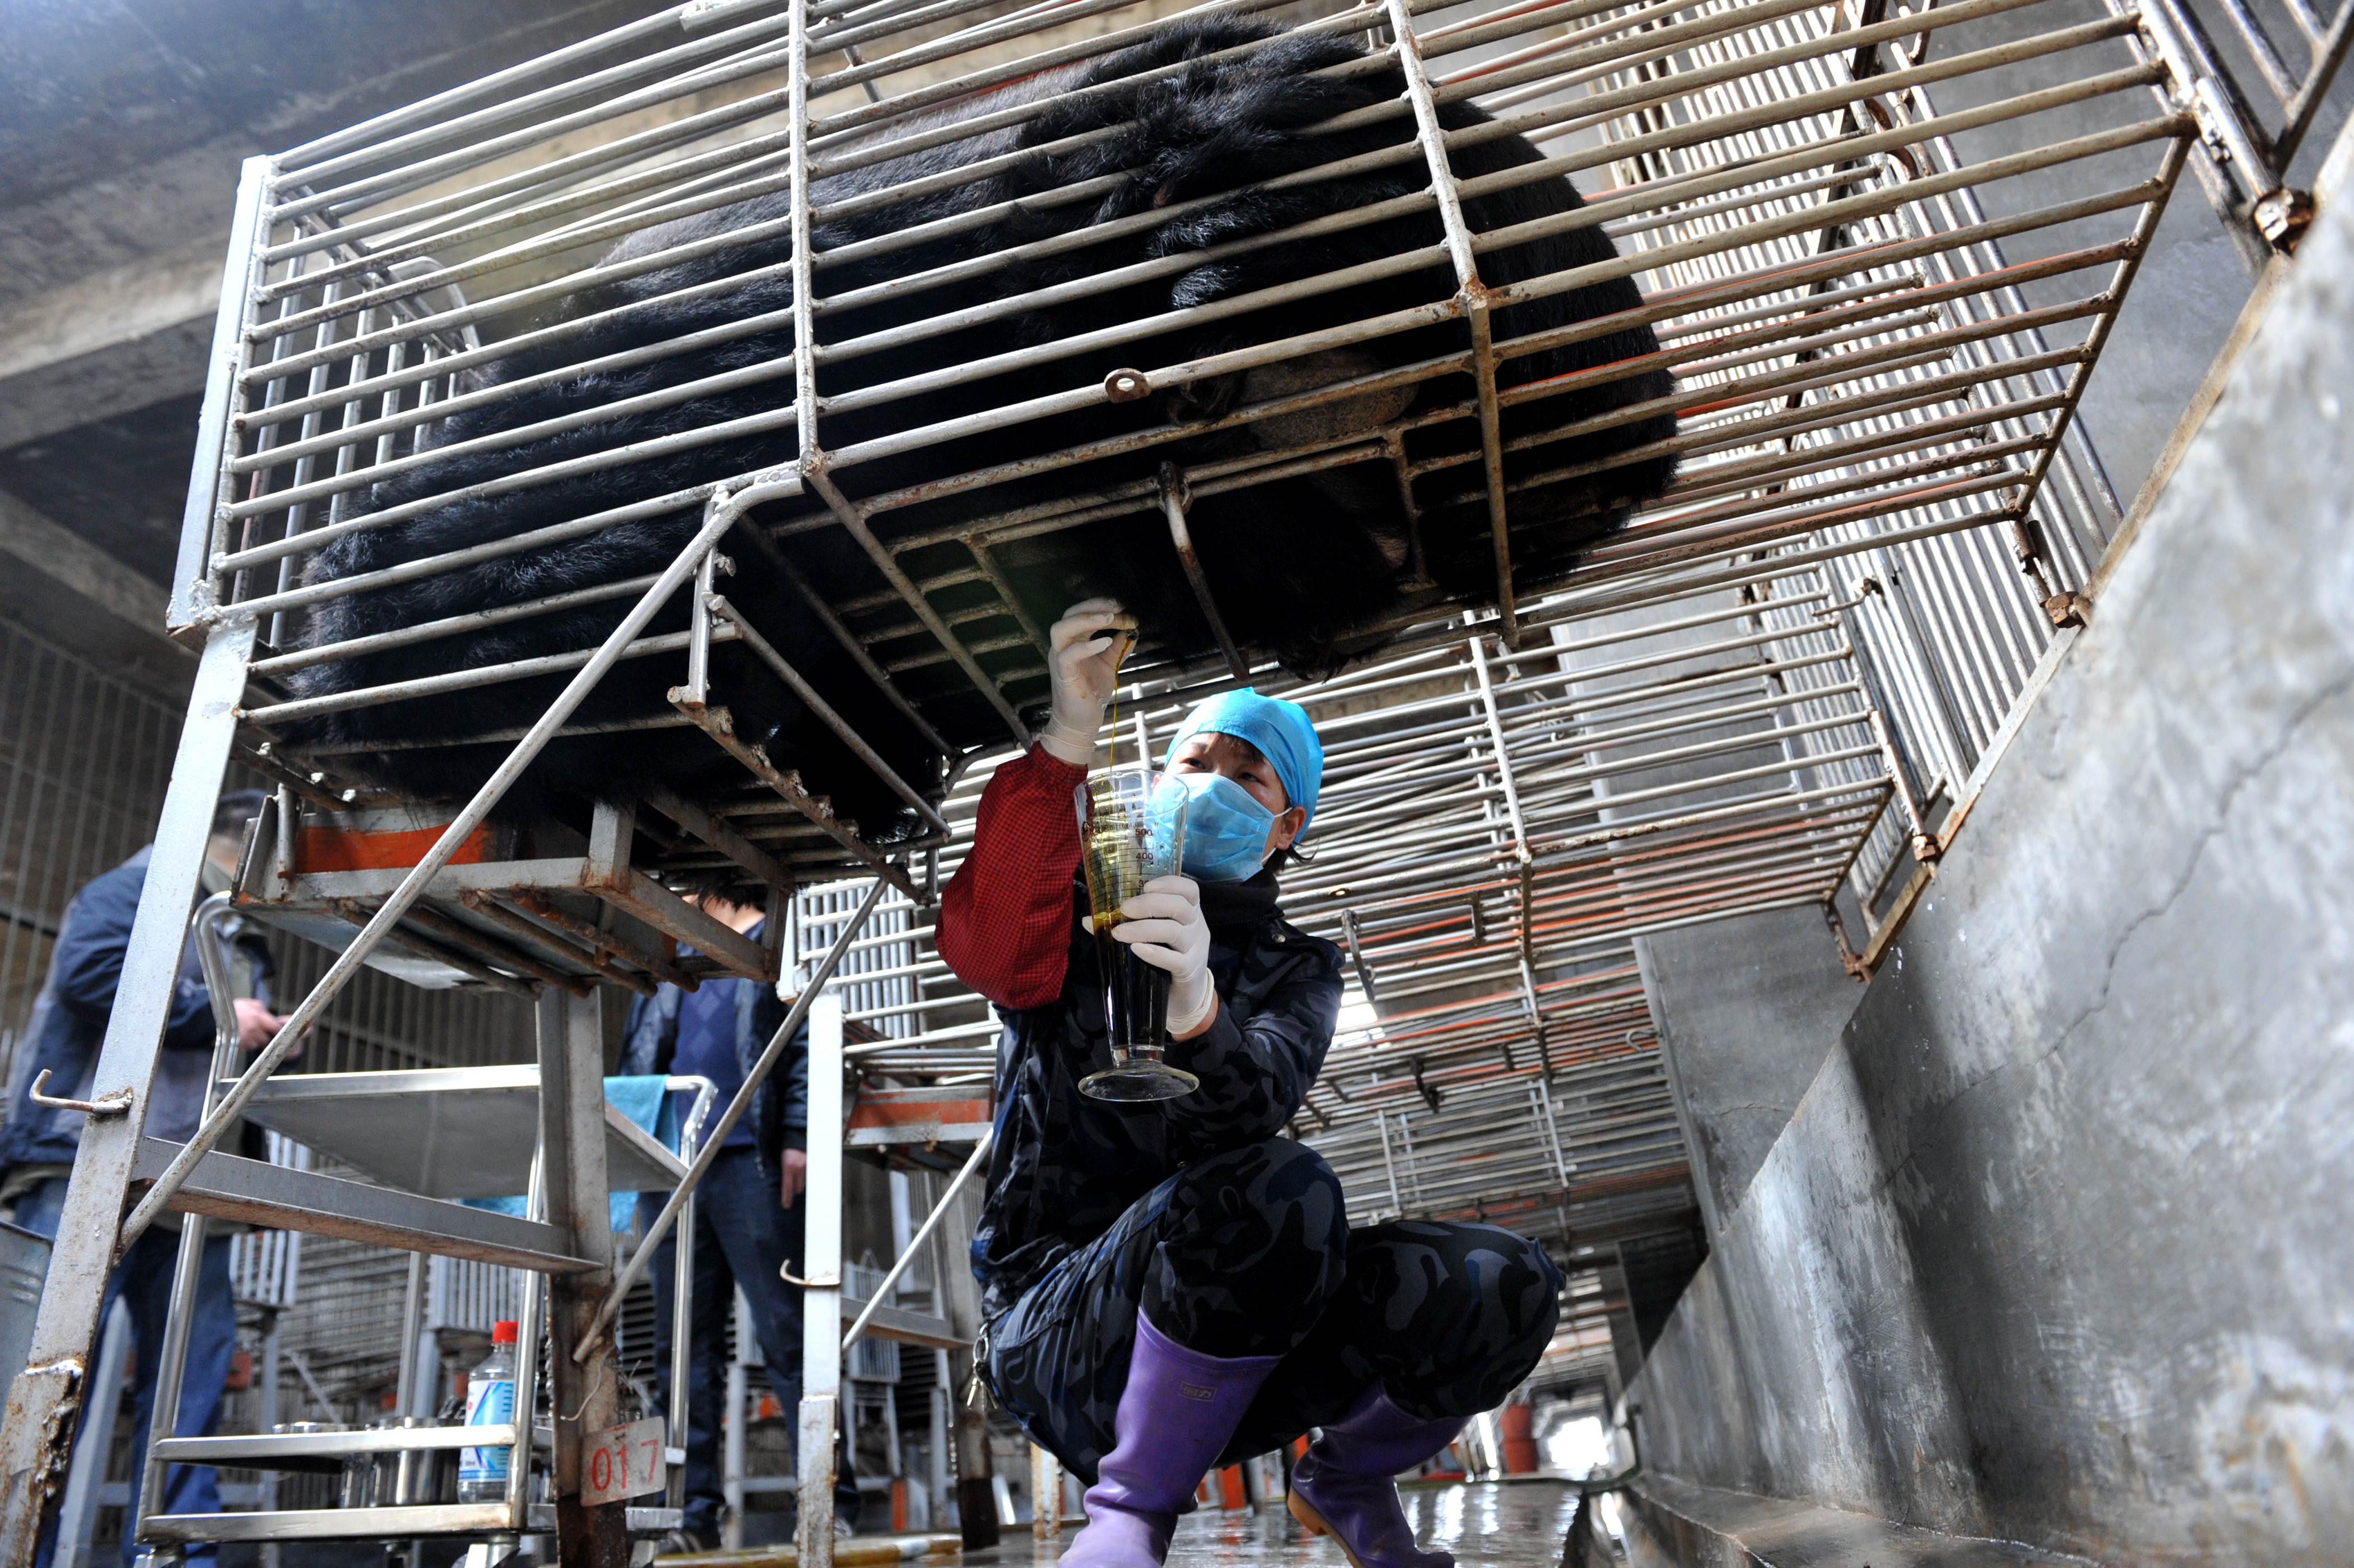 Chinese workers collect bear bile, at one of the traditional Chinese medicine company Guizhentang's controversial bear bile farms in Hui'an, southeast China's Fujian province on February 22, 2012. Bear bile has long been used in China to treat various health problems, despite skepticism over its effectiveness and outrage over the bile extraction process, which animal rights group say is excruciatingly painful for bears. CHINA OUT AFP PHOTO